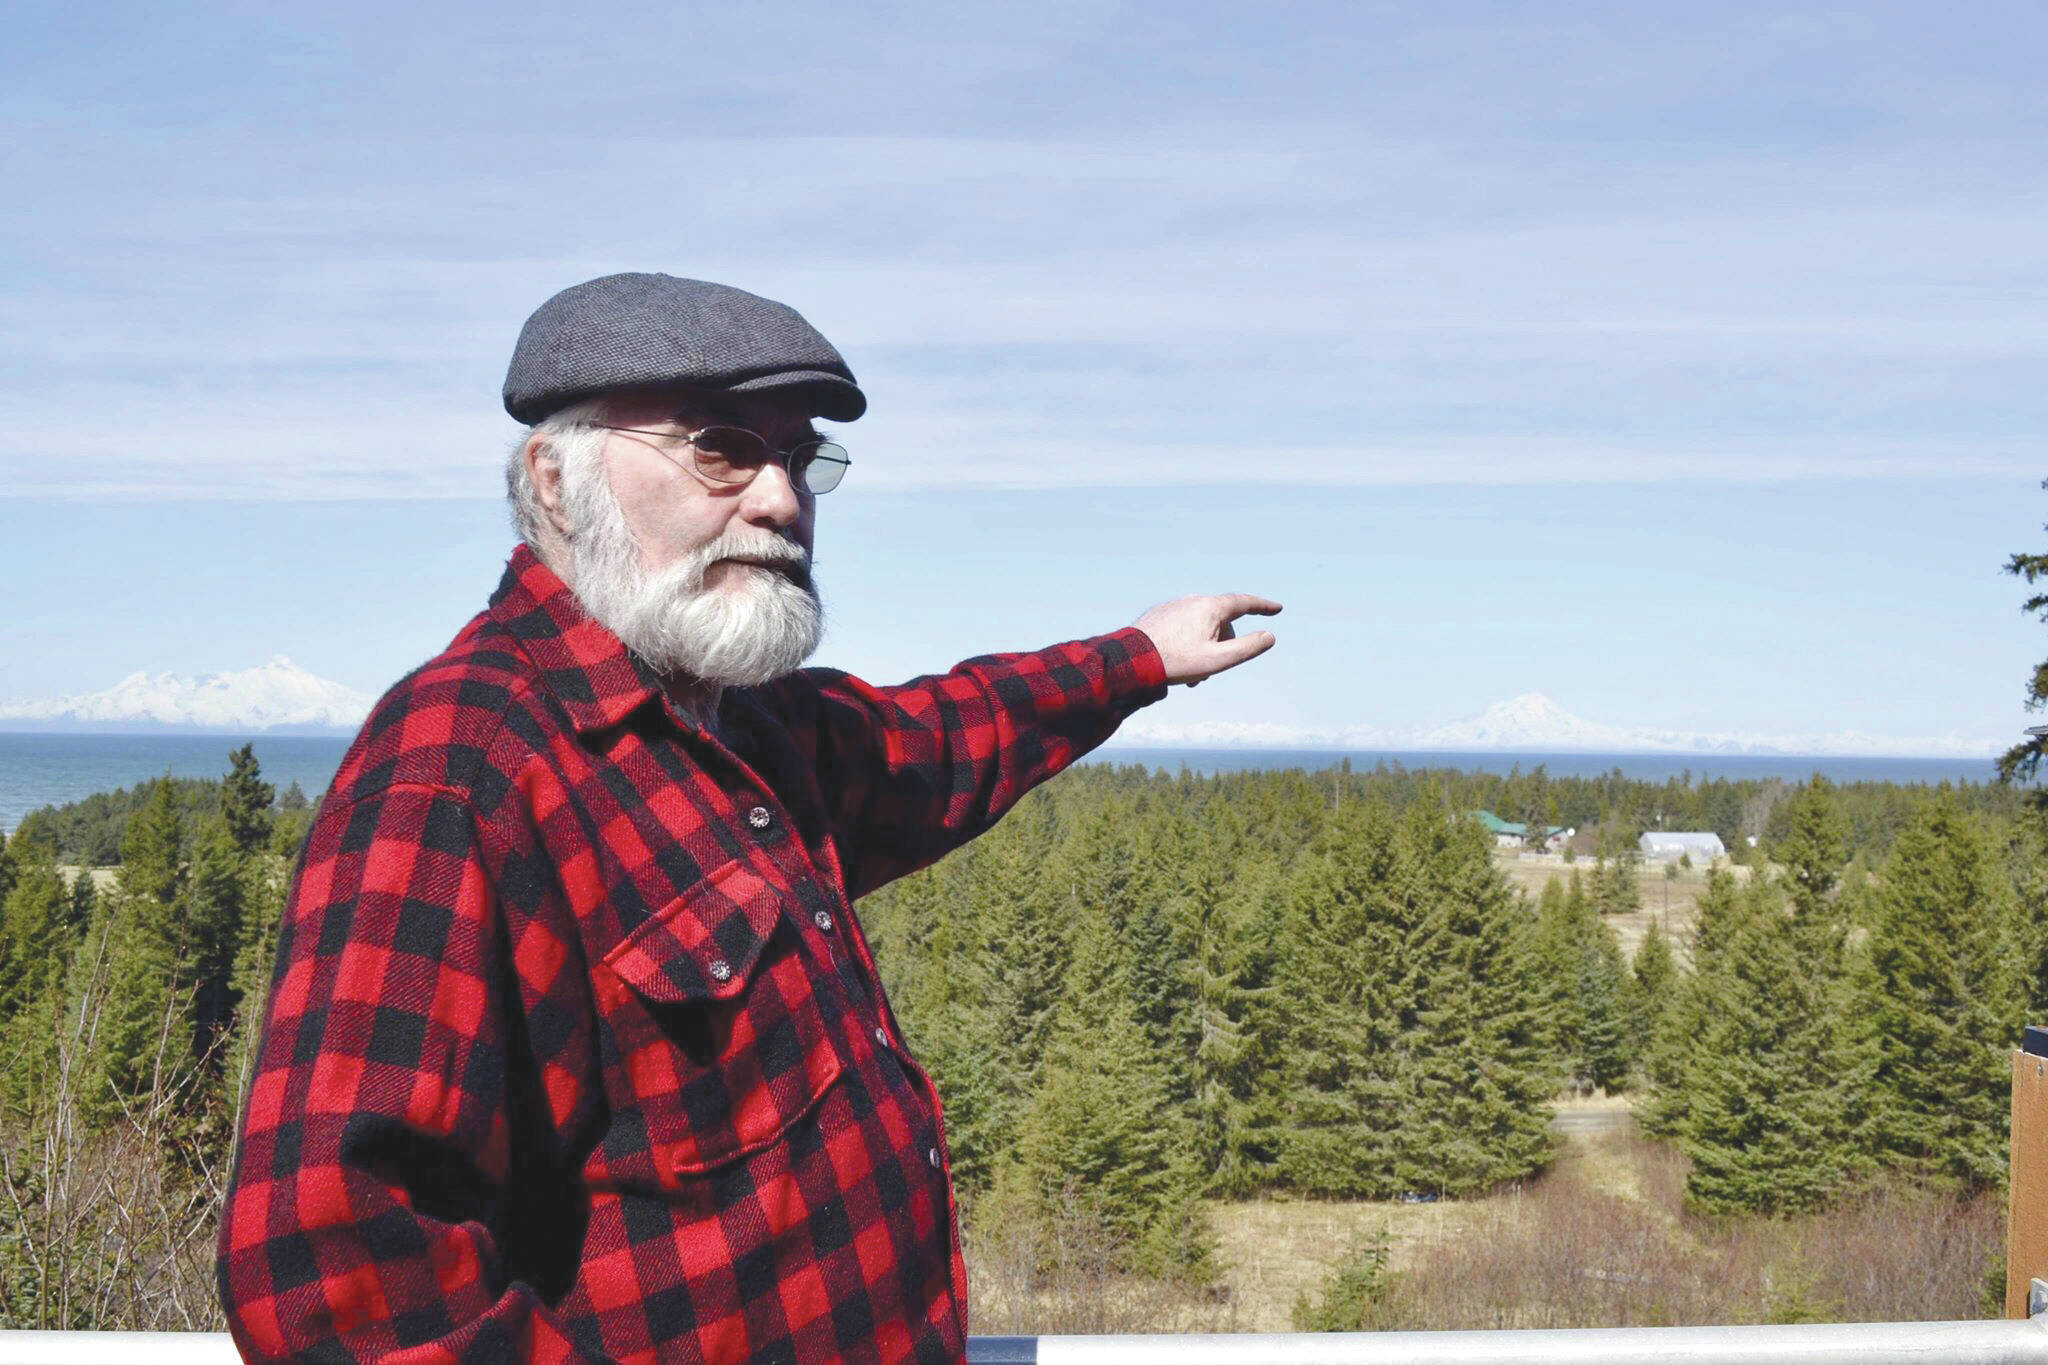 Pete Kineen, a neighbor of the proposed Beachcomber LLC gravel pit, stands on his deck and points to where the pit could be, on May 2, 2019, in Anchor Point, Alaska. (Photo by Victoria Petersen/Peninsula Clarion)